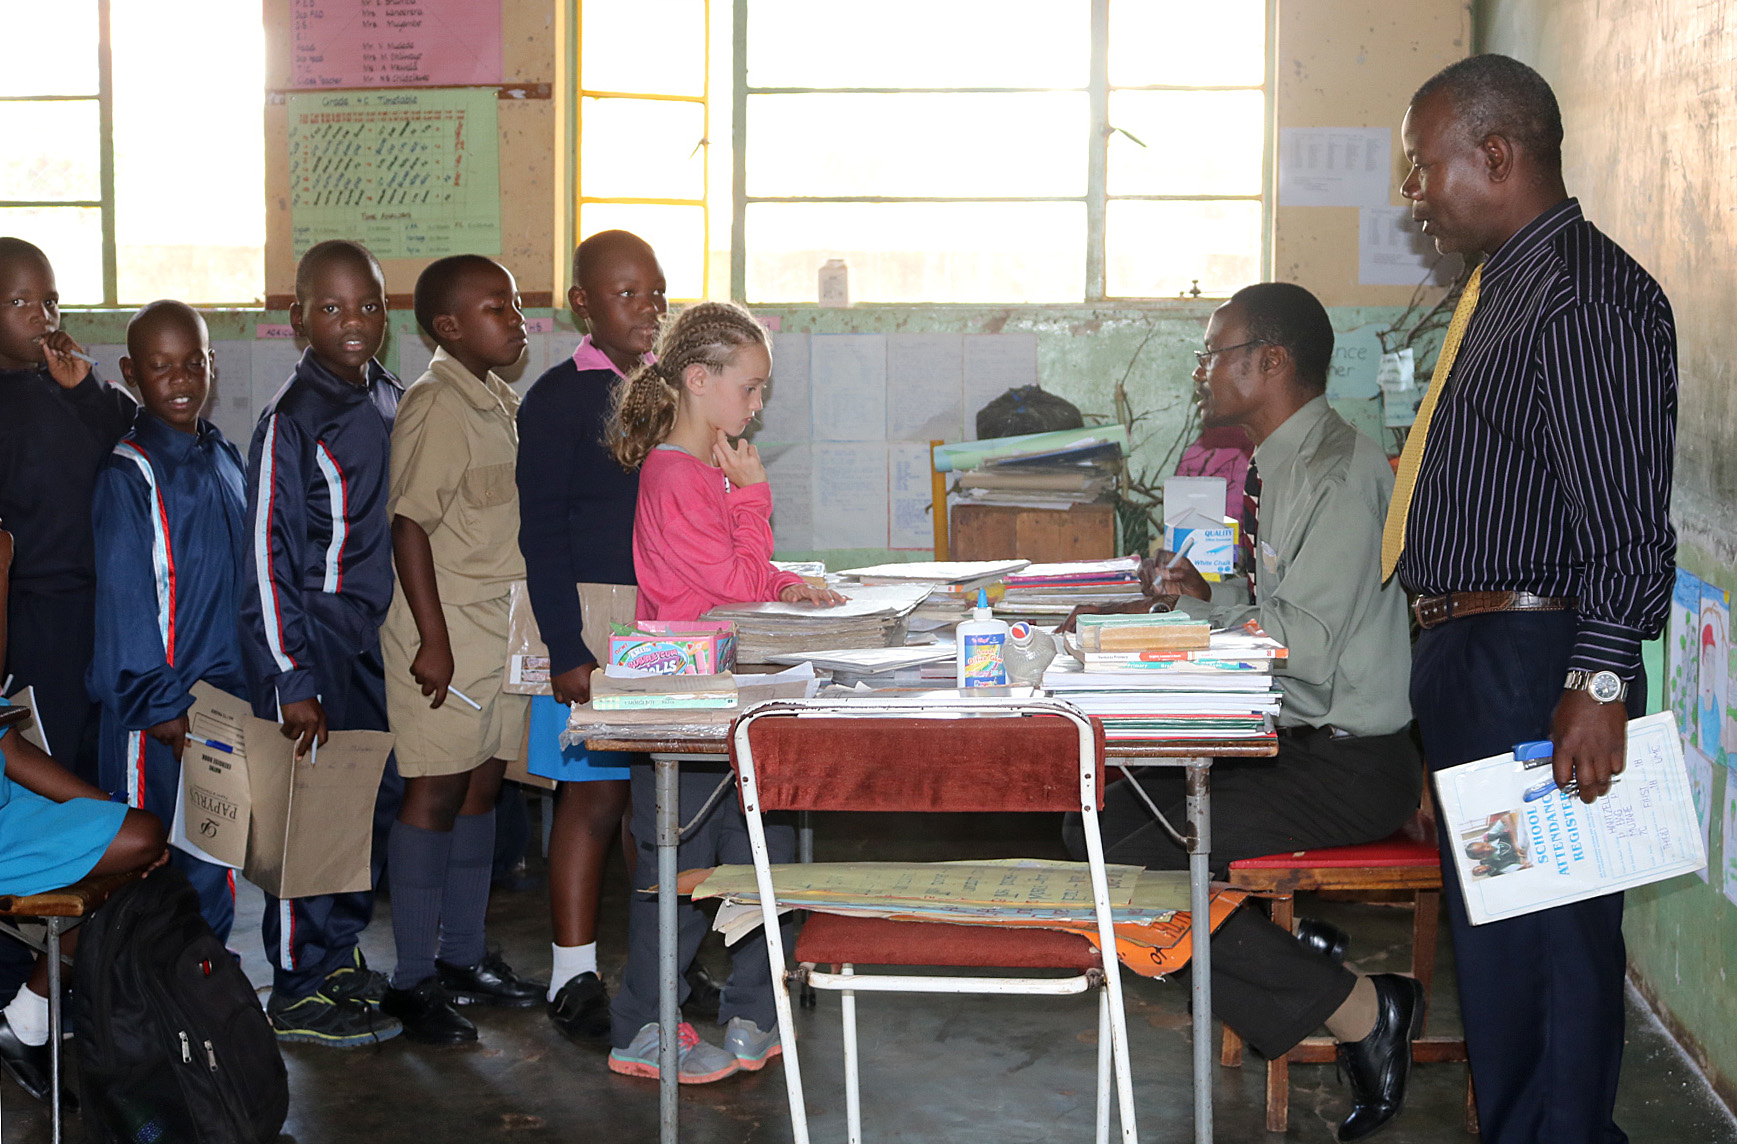 Mikayla Jaissle (center, wearing pink shirt) stands in line with other students while teacher Nicholas Chidzikwe checks her work at Hartzell Primary School in Mutare, Zimbabwe. The 10-year-old from Lakewood, Ohio, accompanied her mother, the Rev. Laura Jaissle, on the trip and attended class at the United Methodist school for two days. Photo by Eveline Chikwanah.